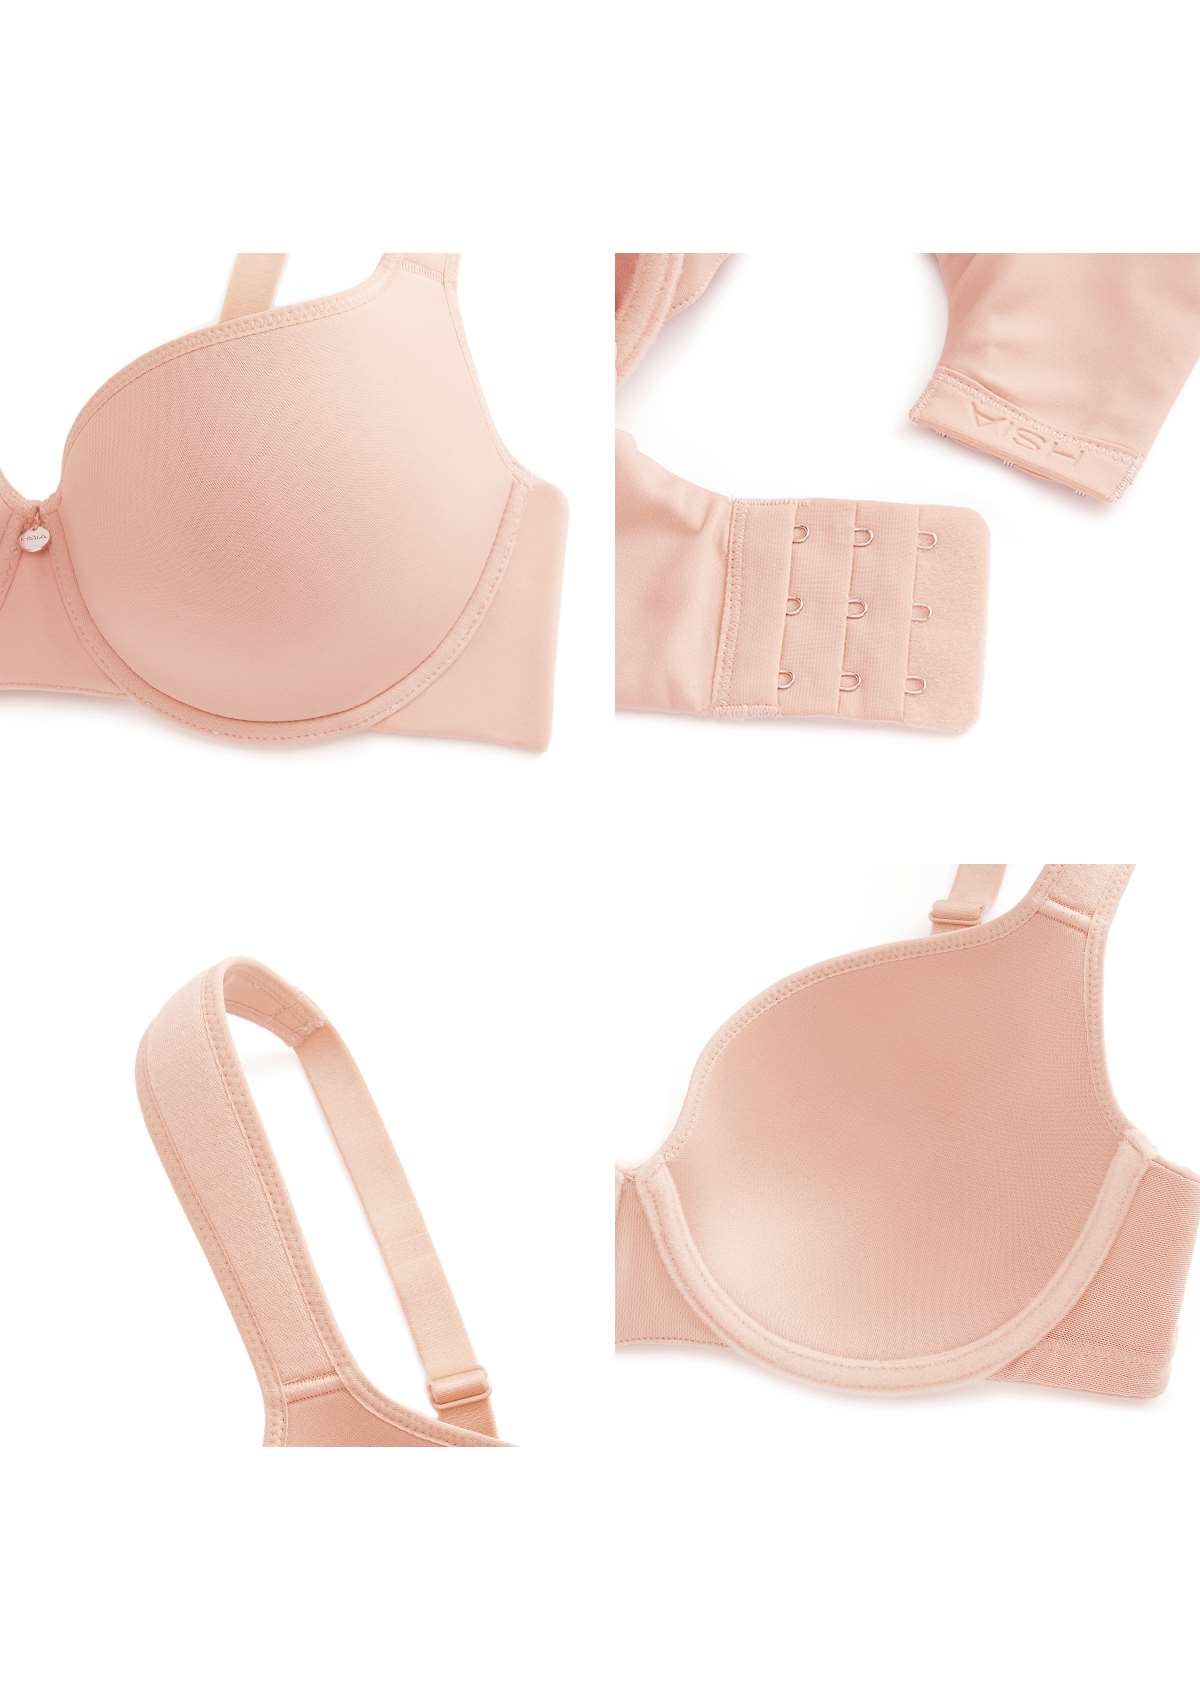 HSIA Patricia Smooth Classic T-shirt Lightly Padded Minimizer Bra - Light Pink / 36 / H